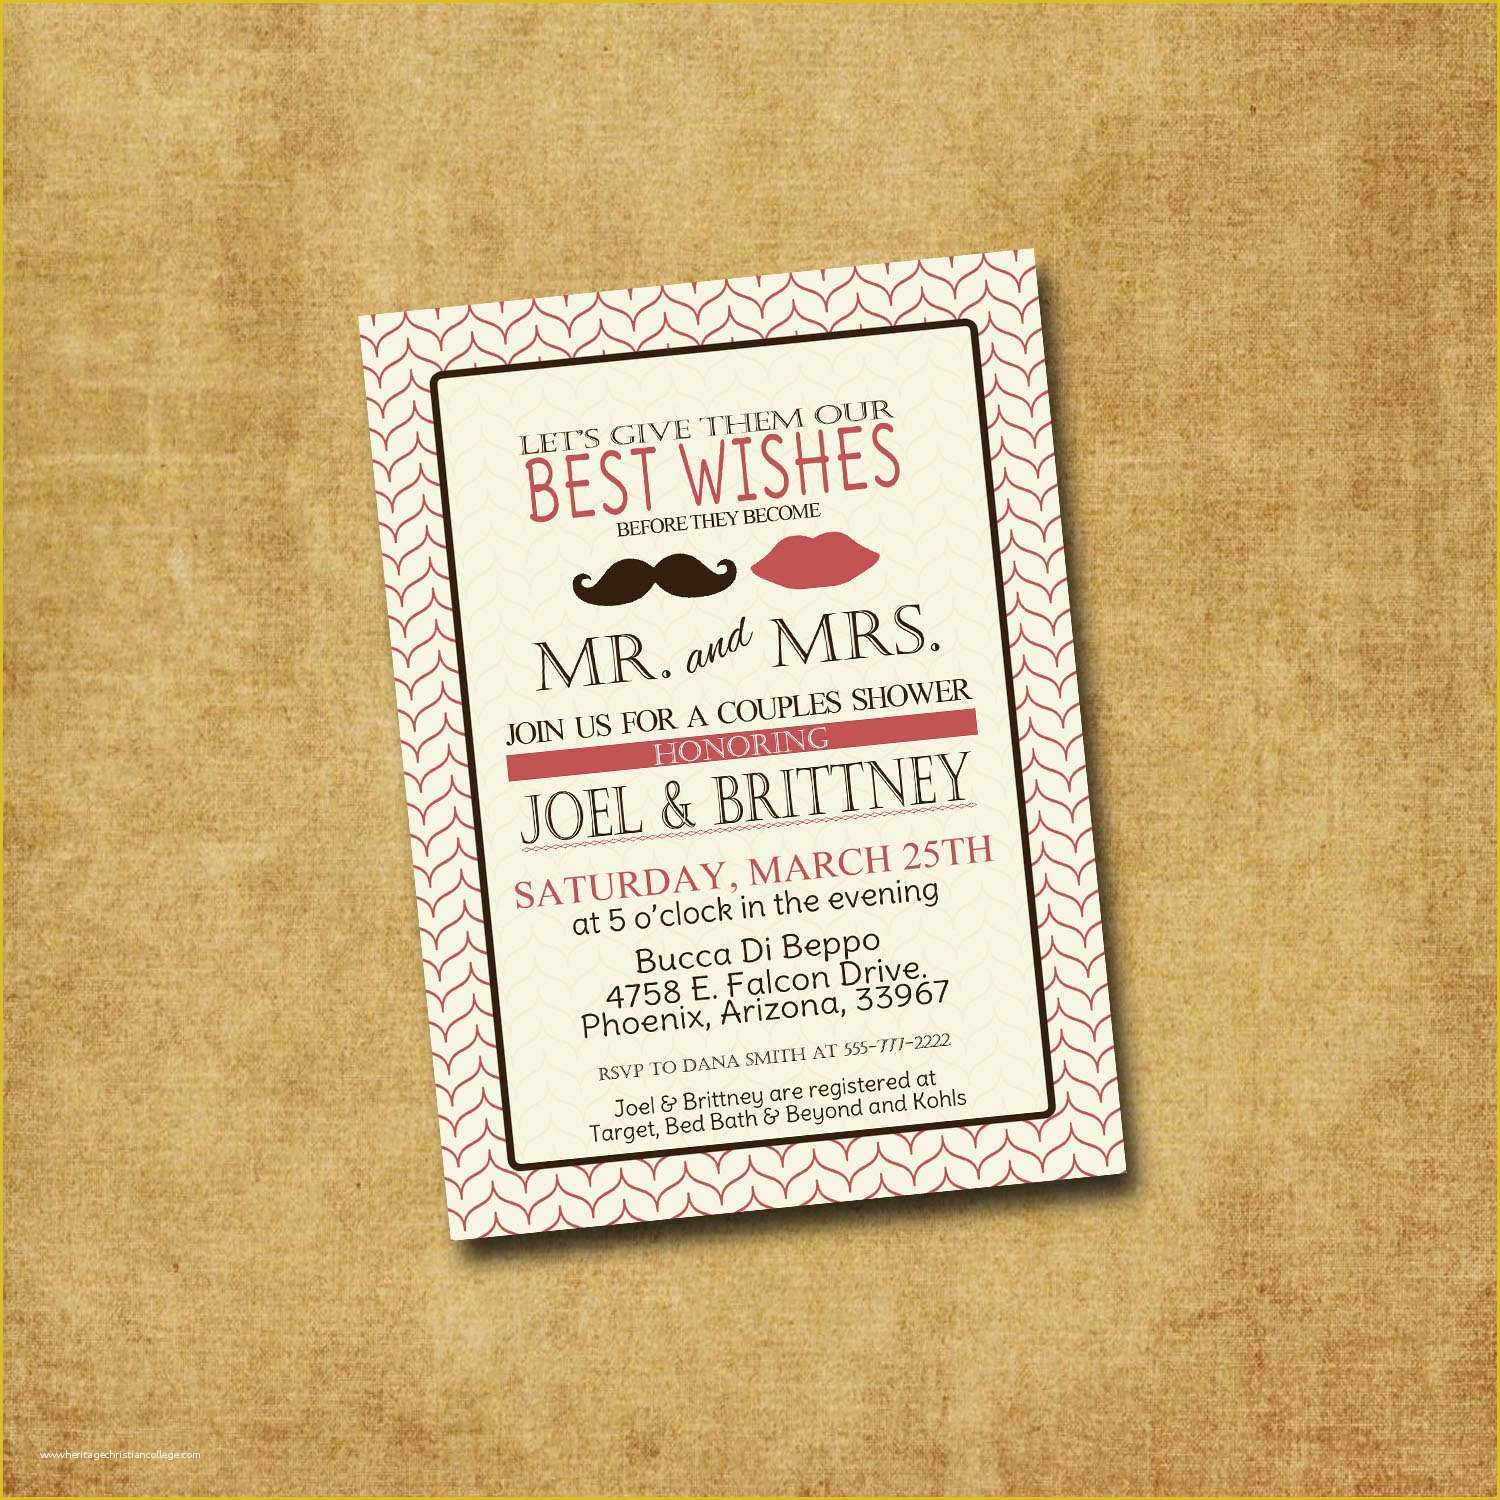 Couples Wedding Shower Invitations Templates Free Of Baby Gift and Shower Decoration Ideas Baby Invitations